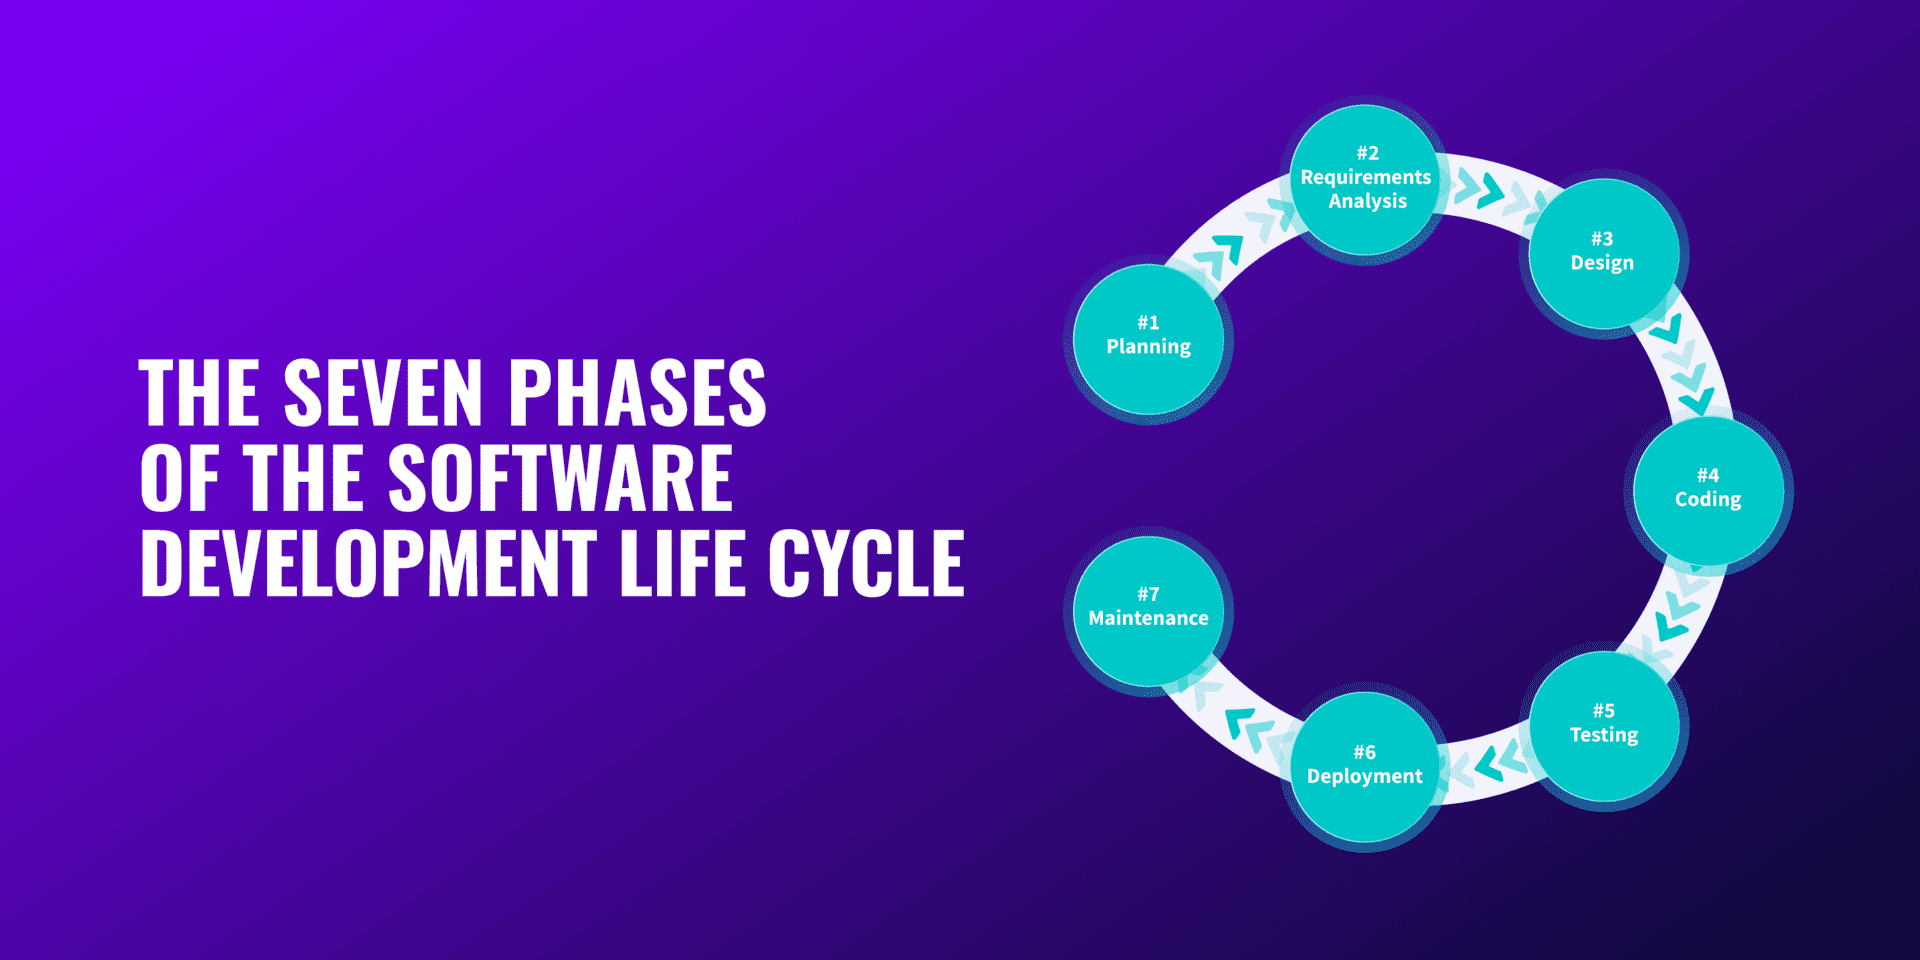 Split - Blog-2160x1080-Seven Phases of the Software Development Life Cycle